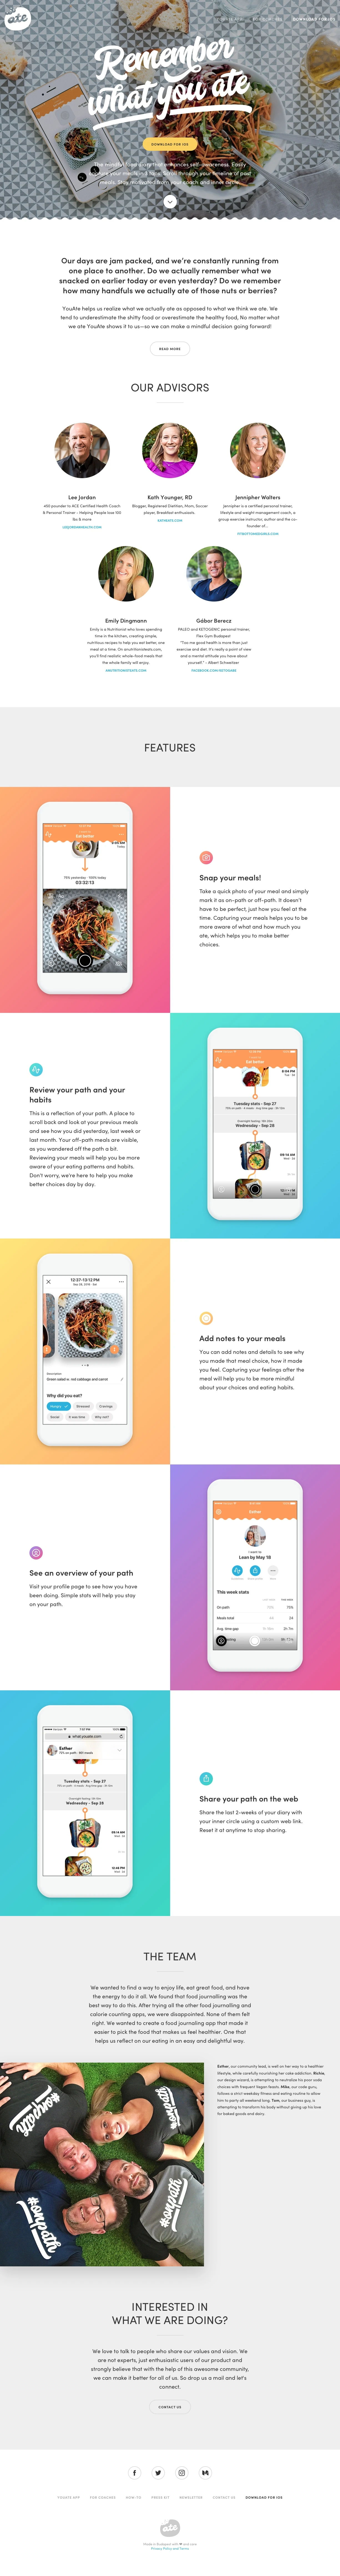 YouAte Landing Page Example: An easy to use food journaling app designed to help you establish and maintain a healthy eating habit.